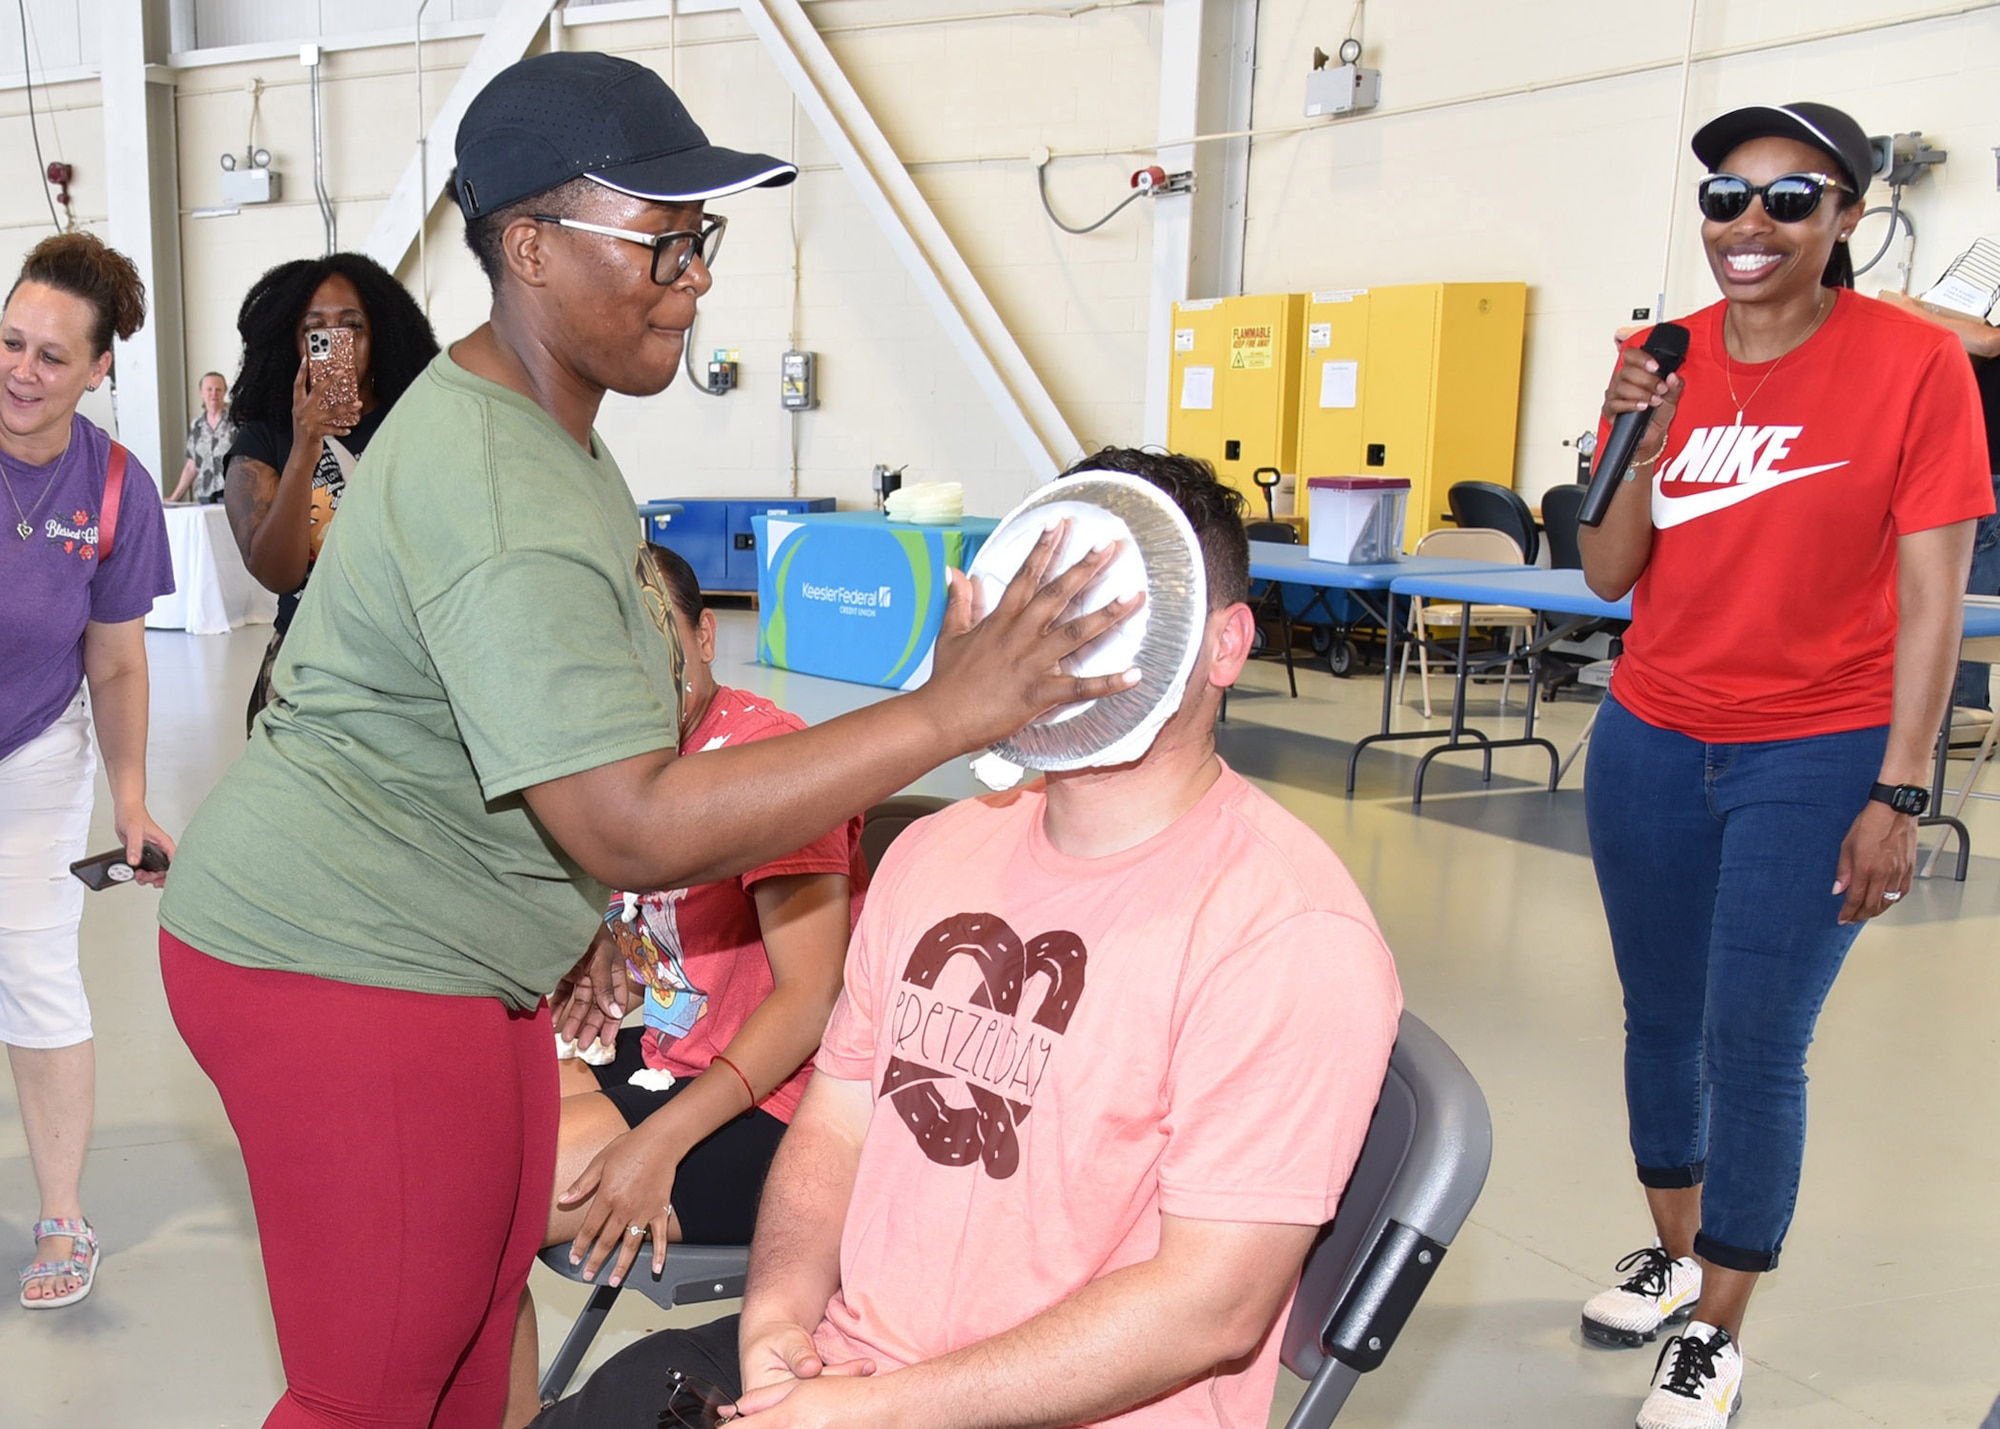 Sergeant Goosby holds a pie to the face of sergeant Rodriguez as onlookers watch